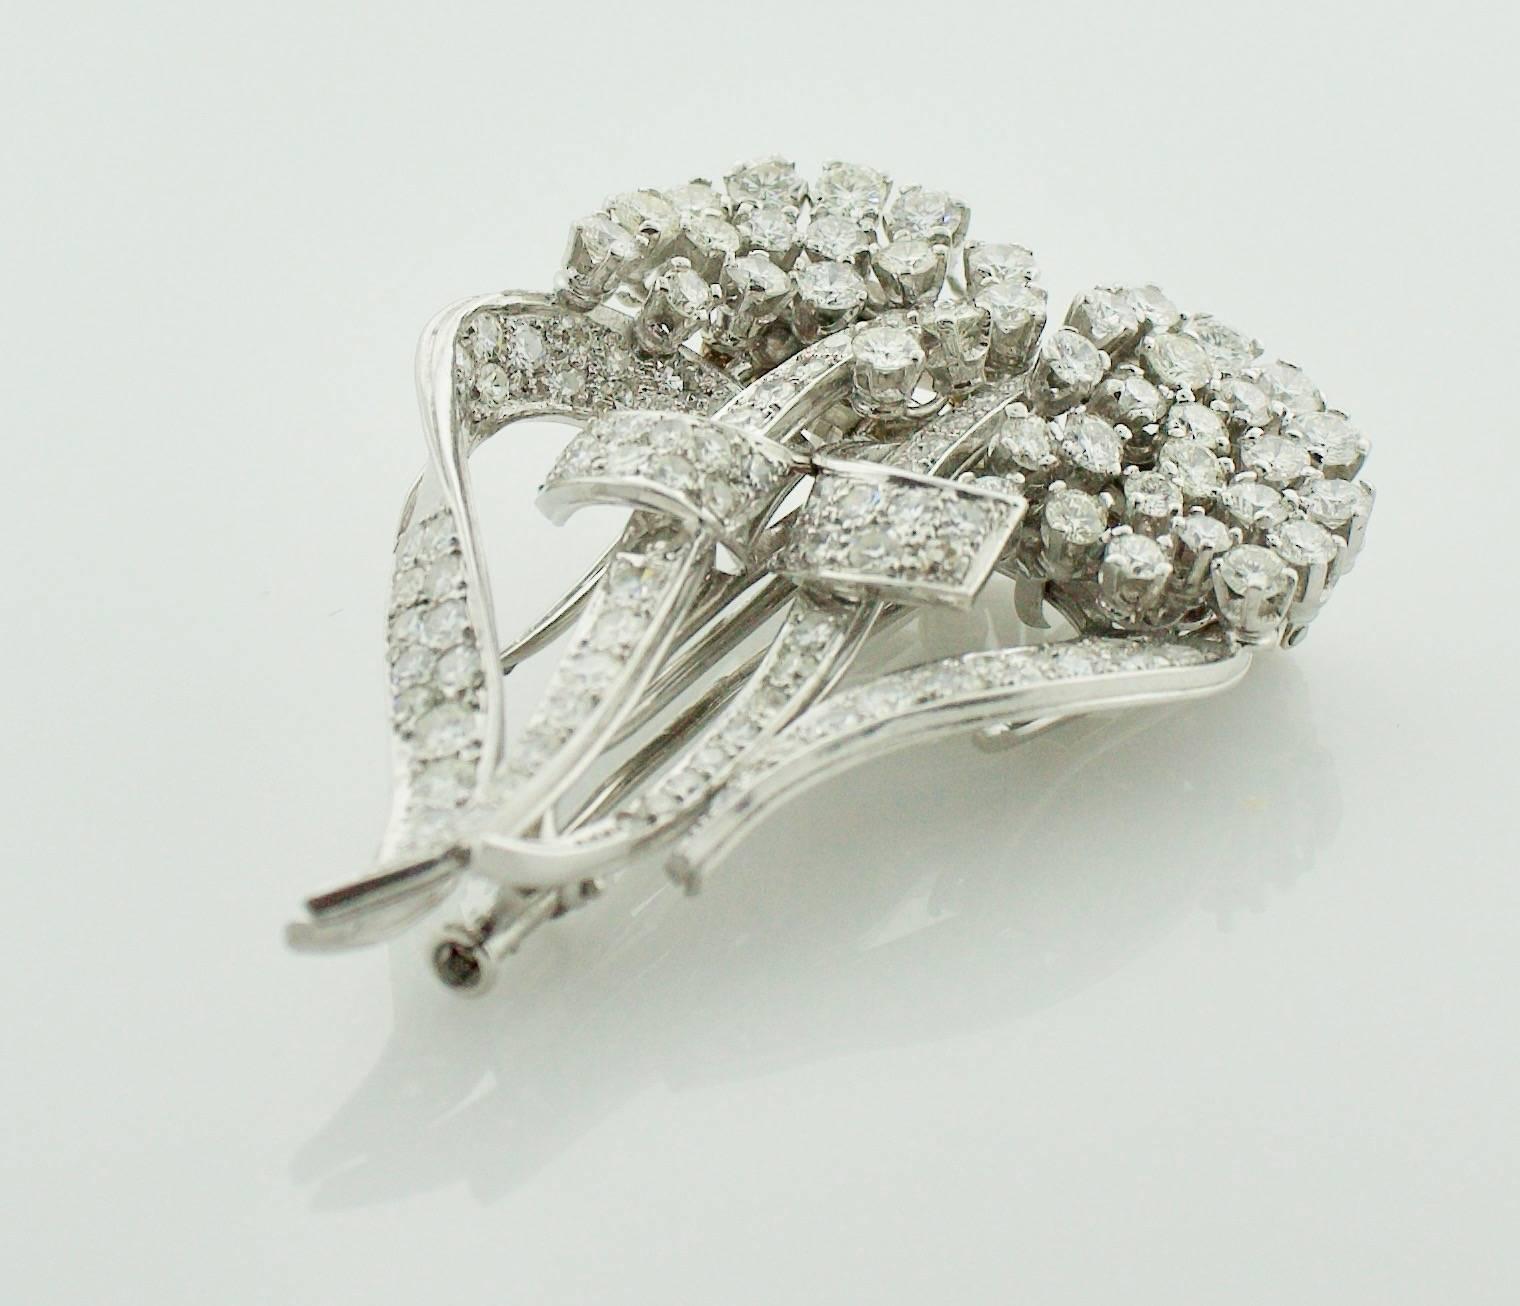 1940's Diamond Brooch Clips

This stunning 1940's diamond brooch clip is a truly unique and versatile piece. It is set with 106 round diamonds, weighing approximately 6.30 carats. The diamonds are of fine quality, with a color grade of GH and a